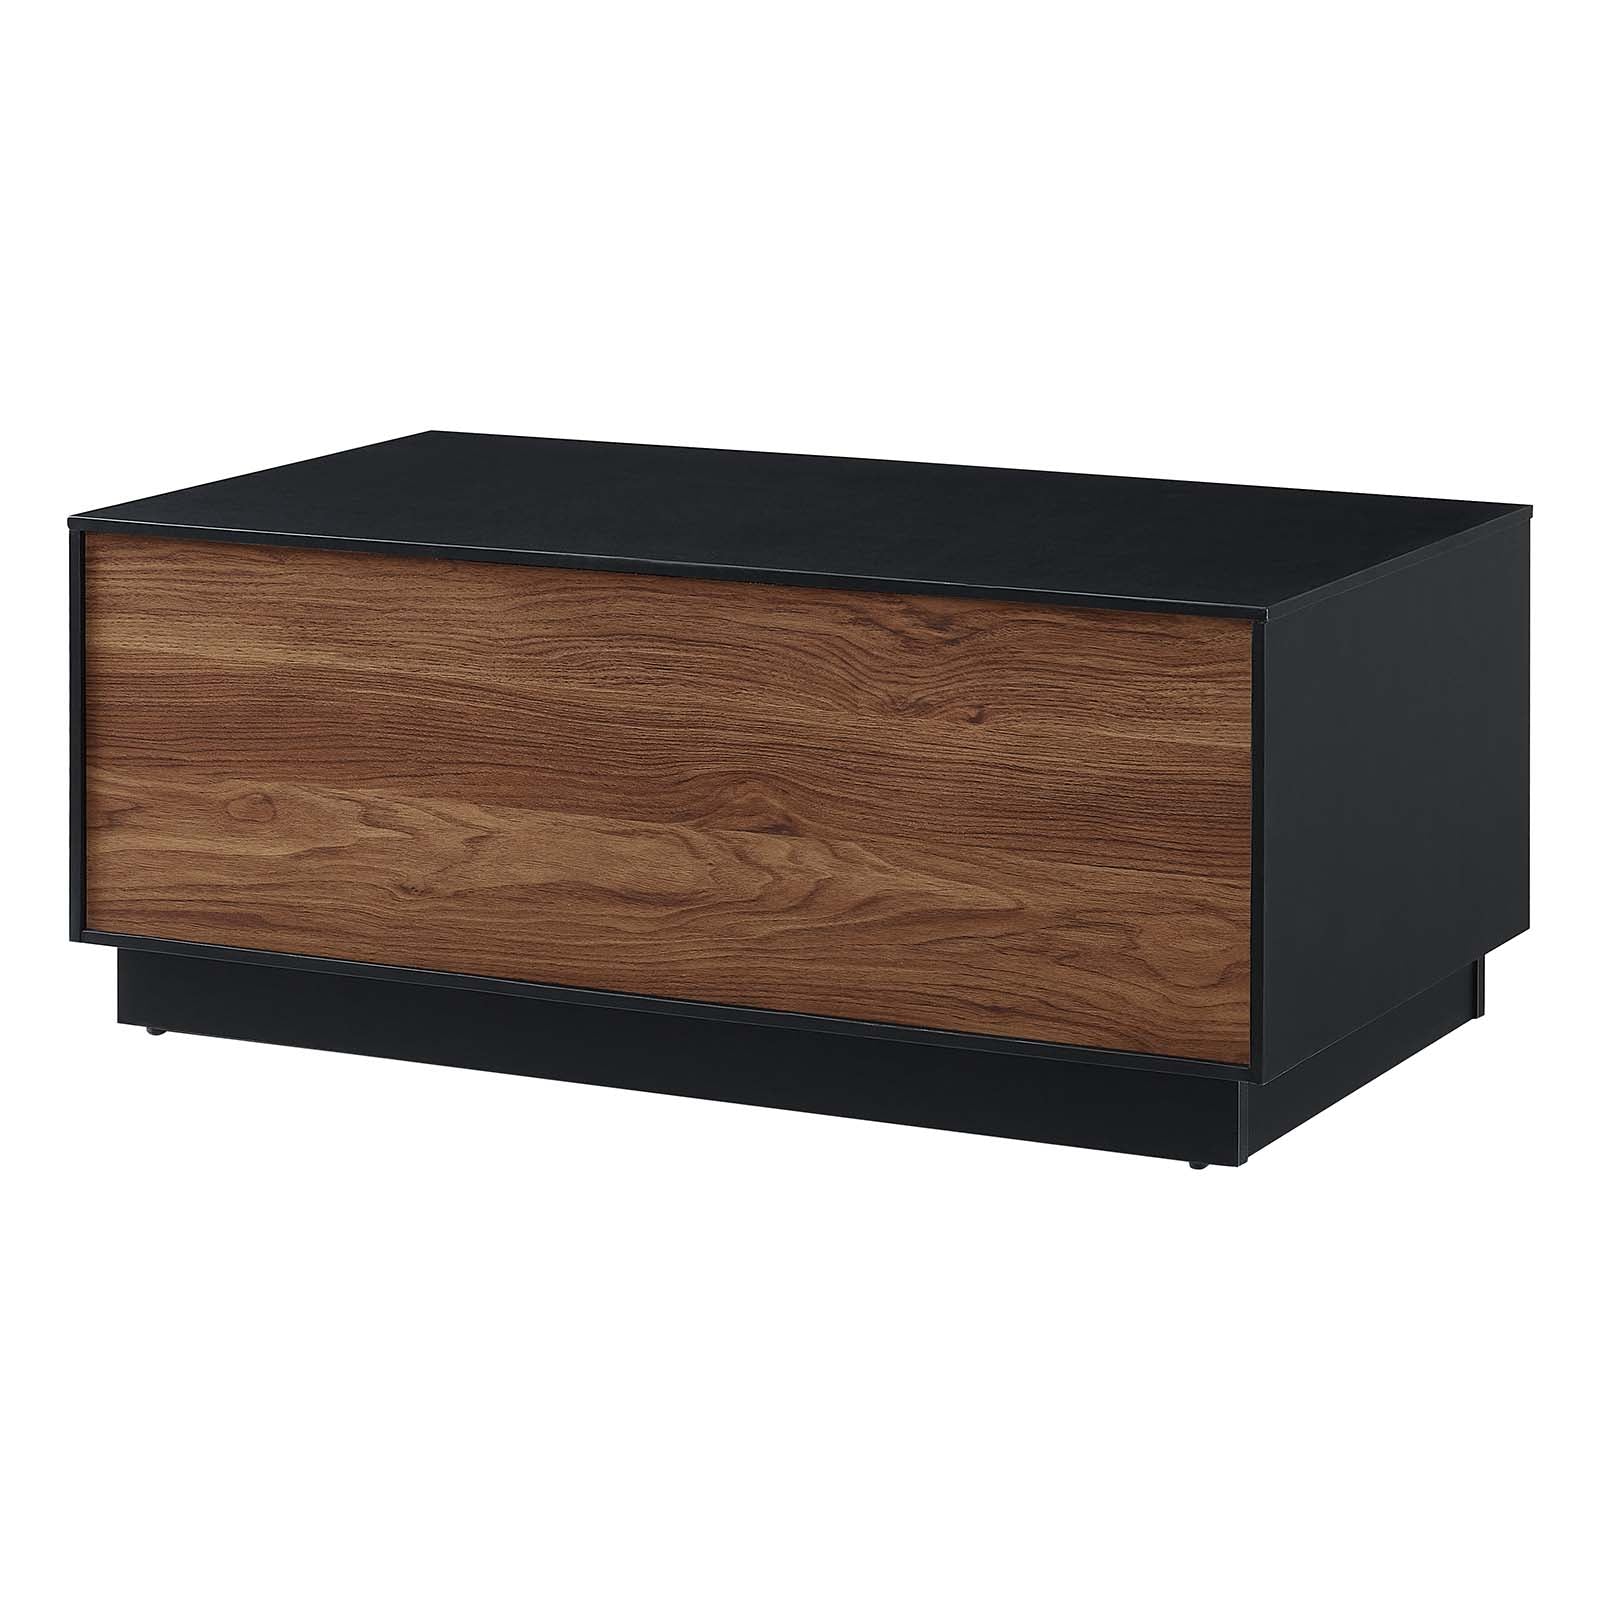 Holden 36” Coffee Table - East Shore Modern Home Furnishings